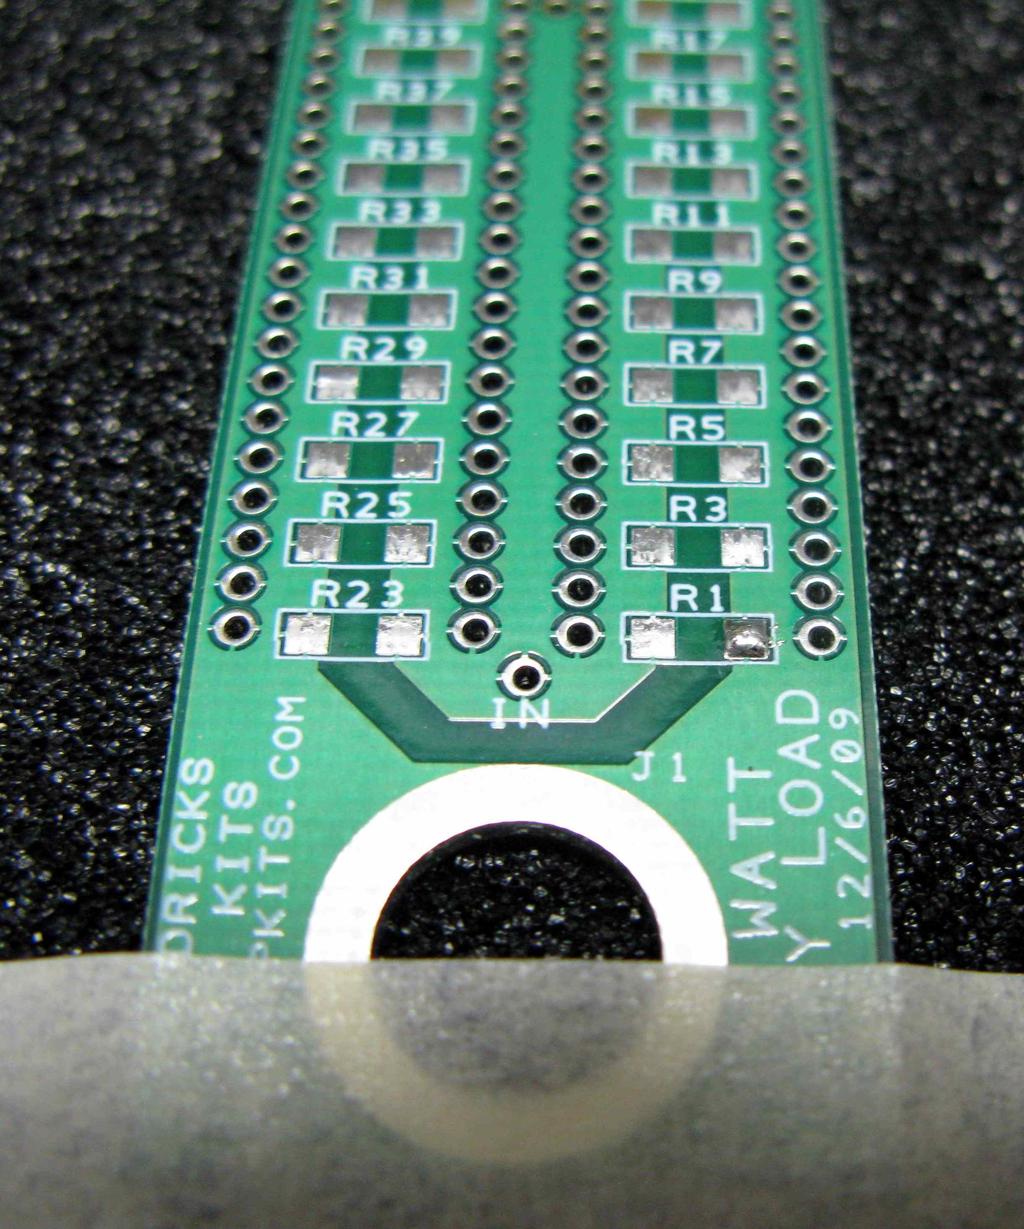 o Orient J2 at the top and we will begin with R1 in the lower right corner. The method we will be using, is to apply a small amount of solder to the right side of the pad as shown below.